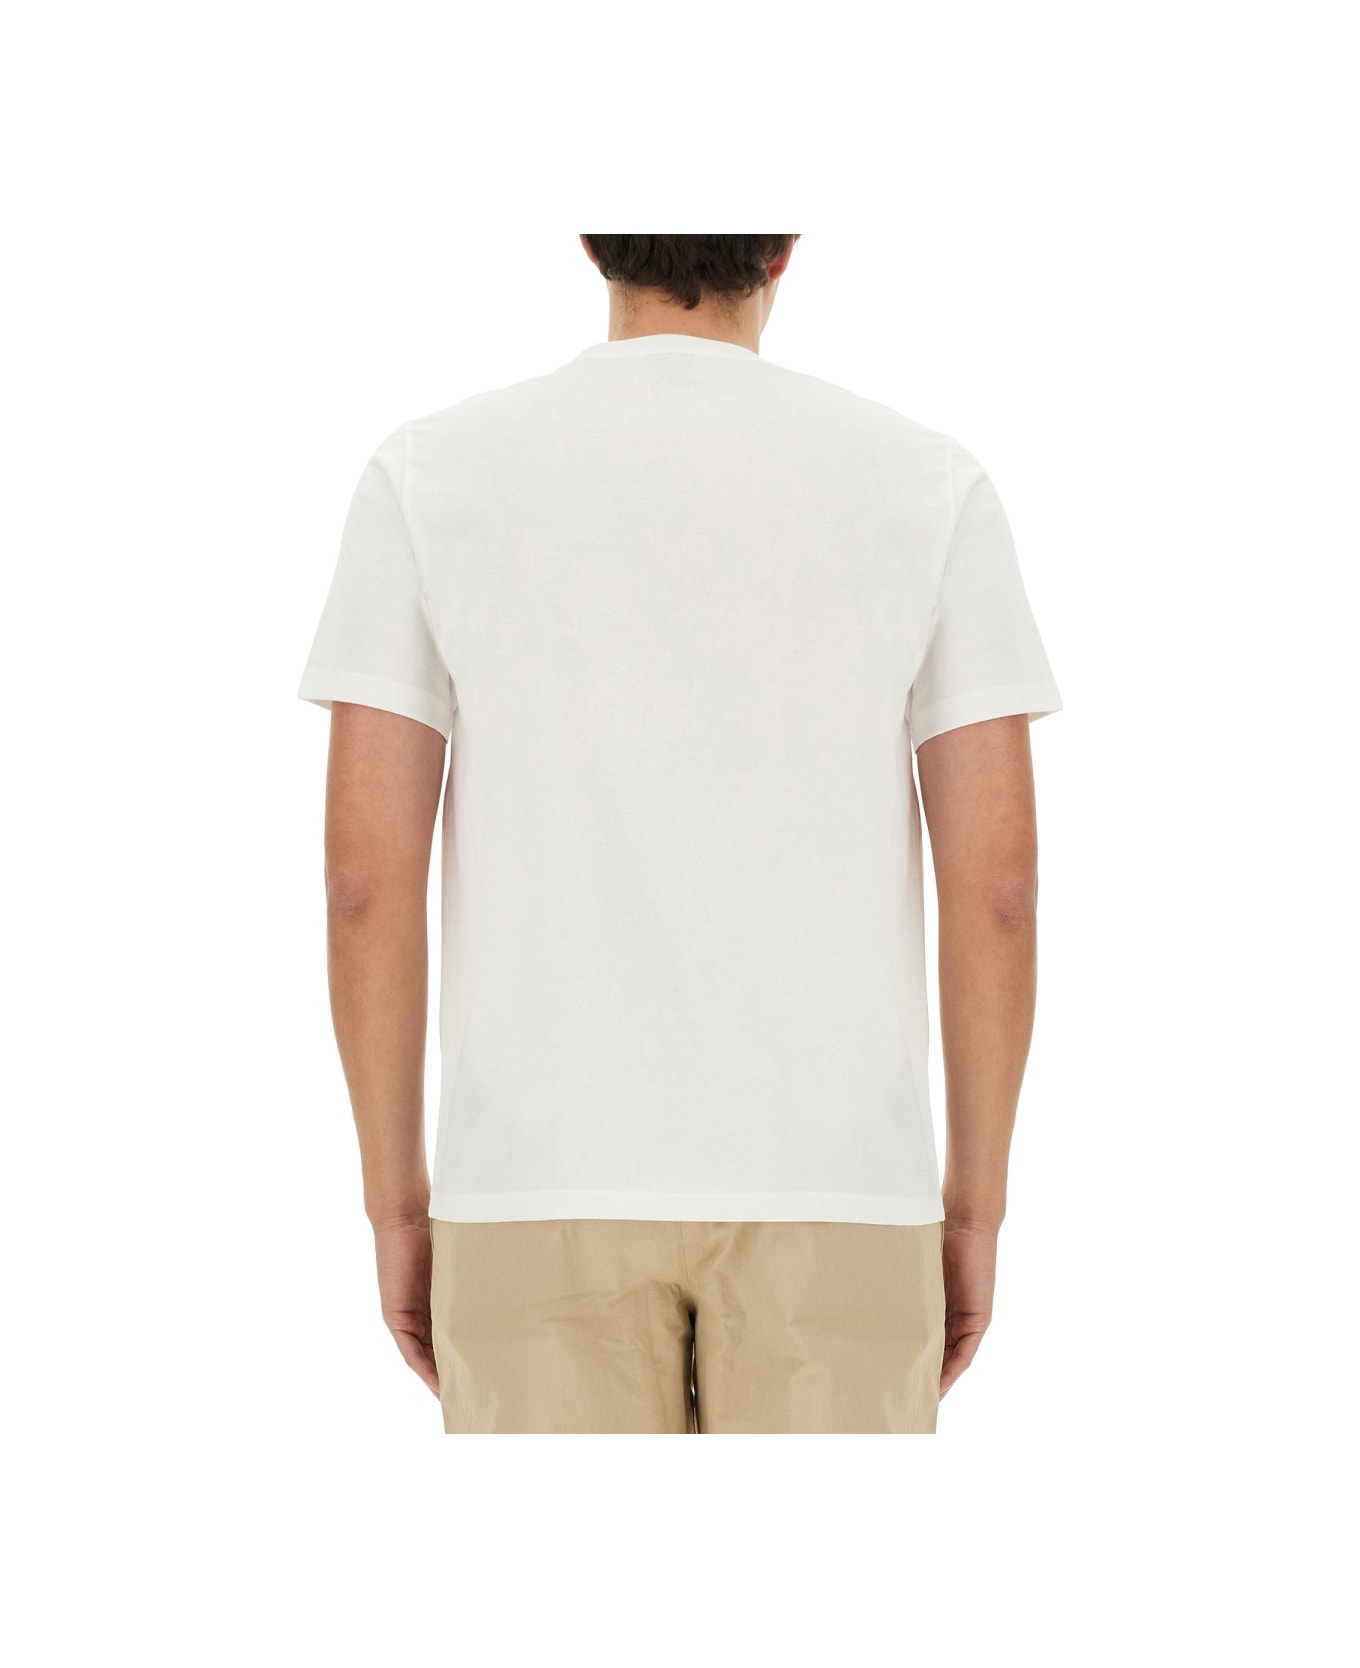 PS by Paul Smith Skull Print T-shirt - WHITE シャツ